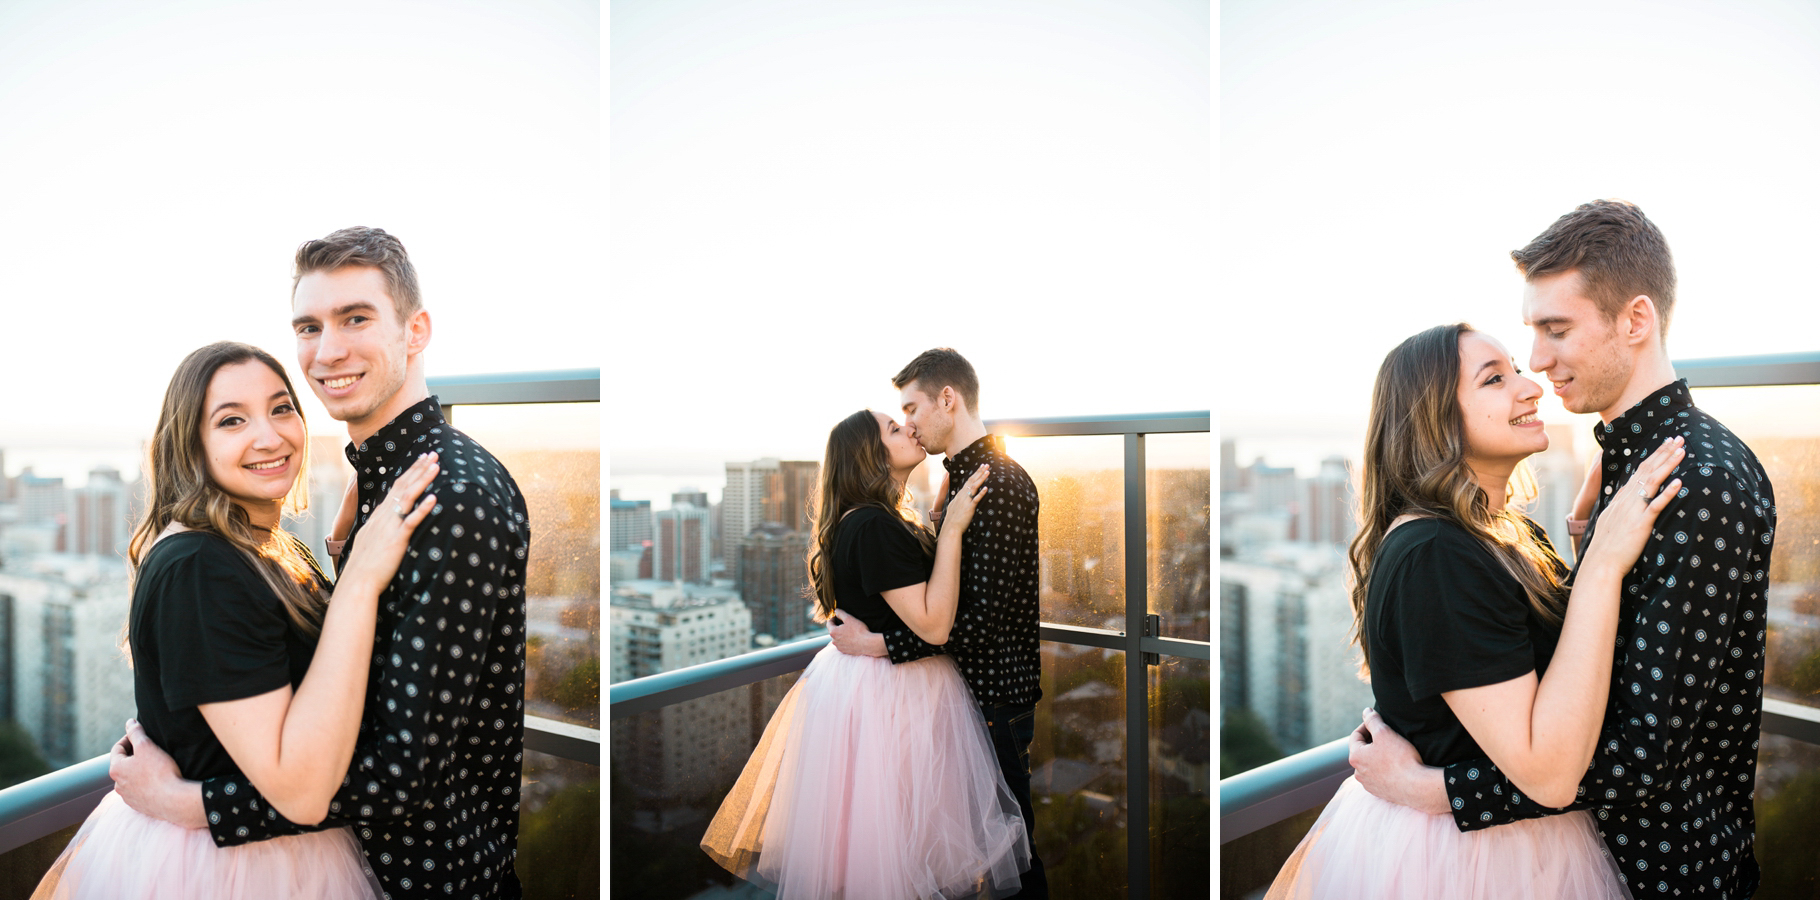 16-Capitol-Hill-sunset-rooftop-Engagement-Session-seattle-wedding-photographer